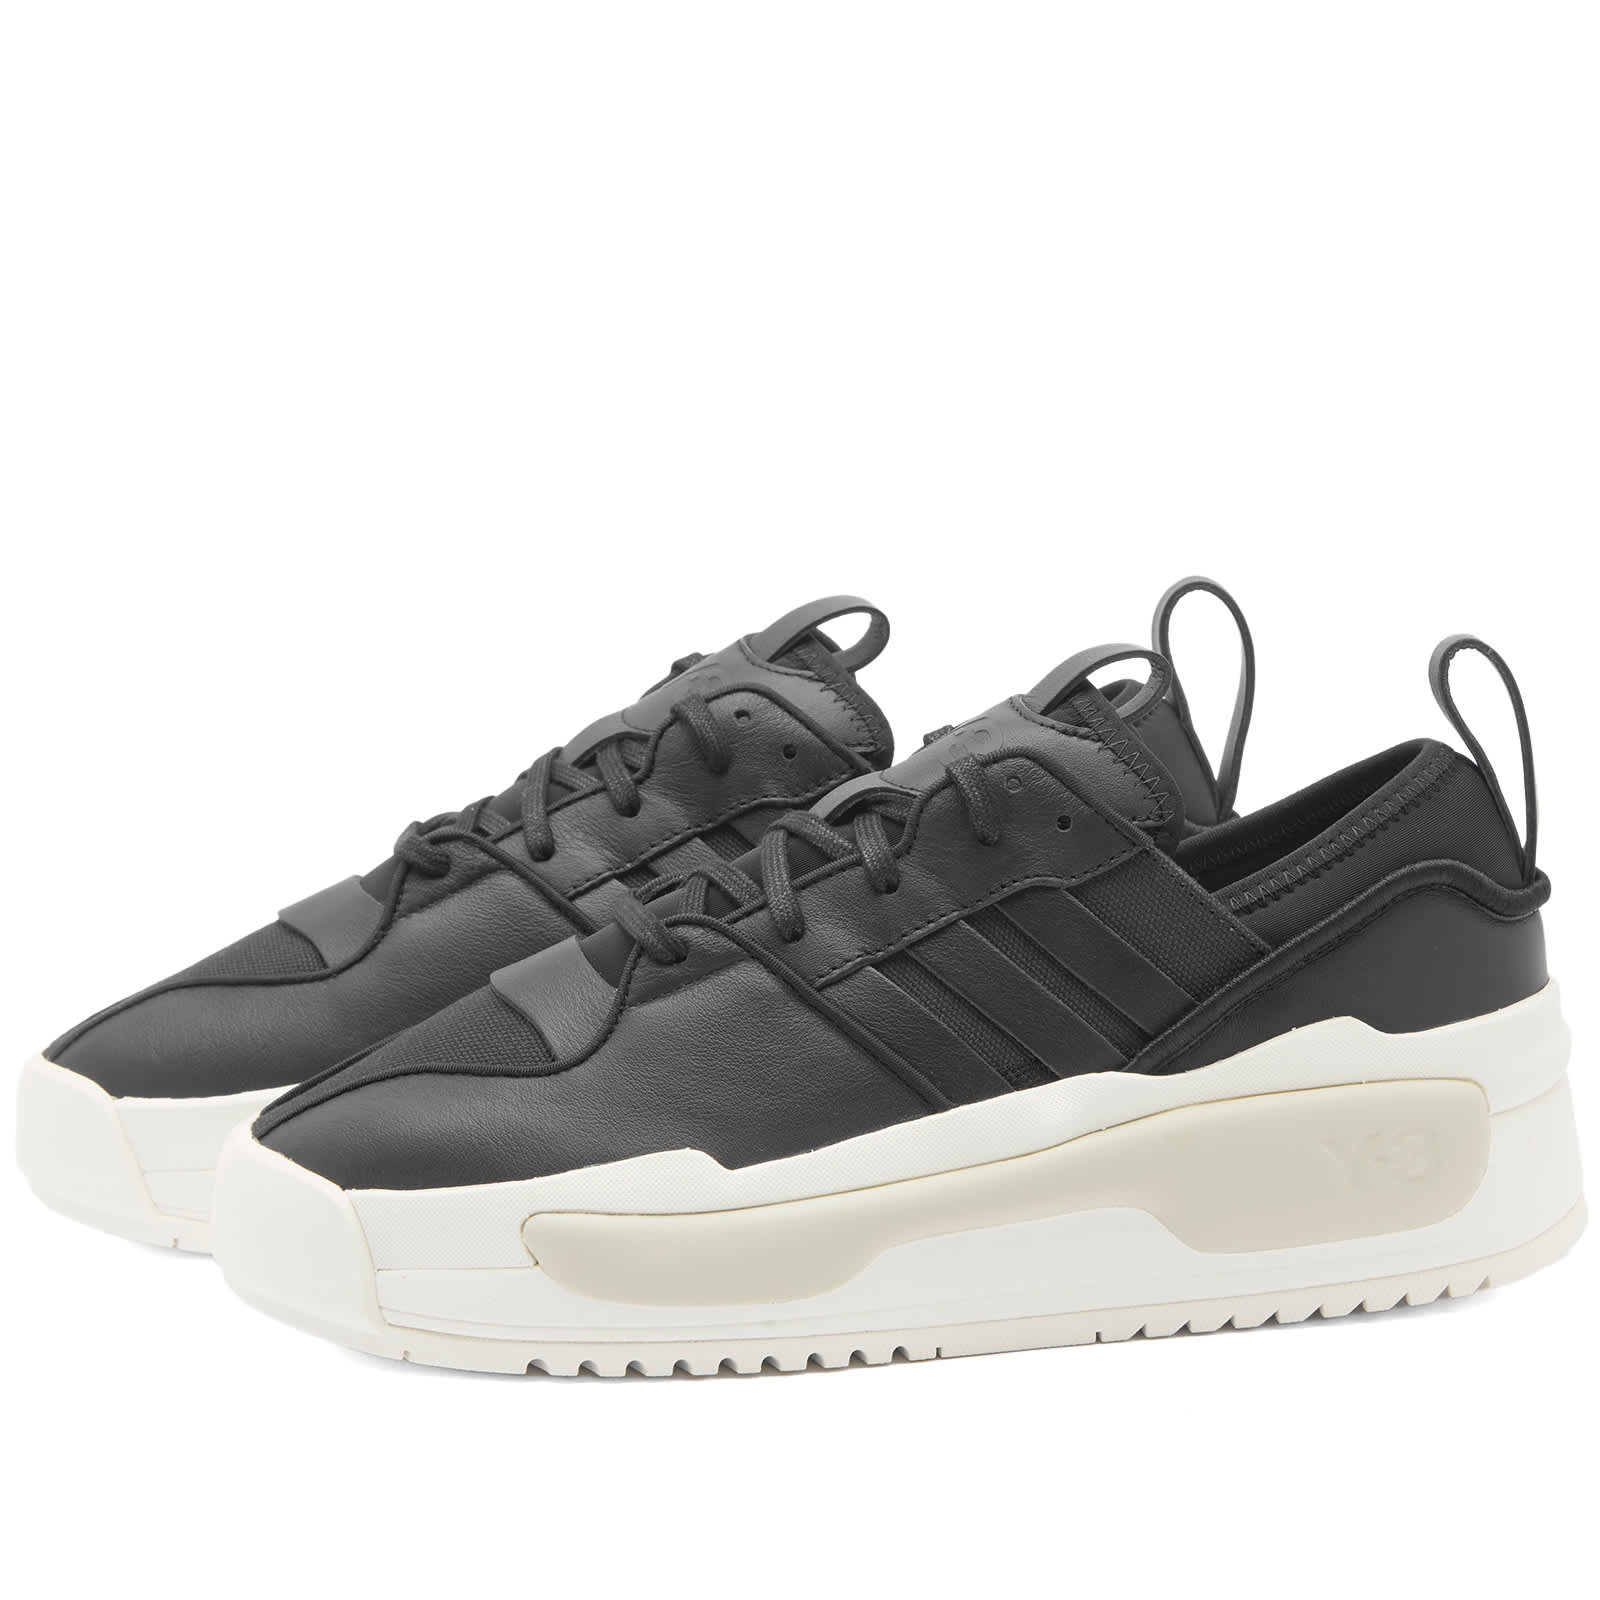 Кроссовки Y-3 Rivalry, цвет Black, Off White & Clear Brown цена и фото